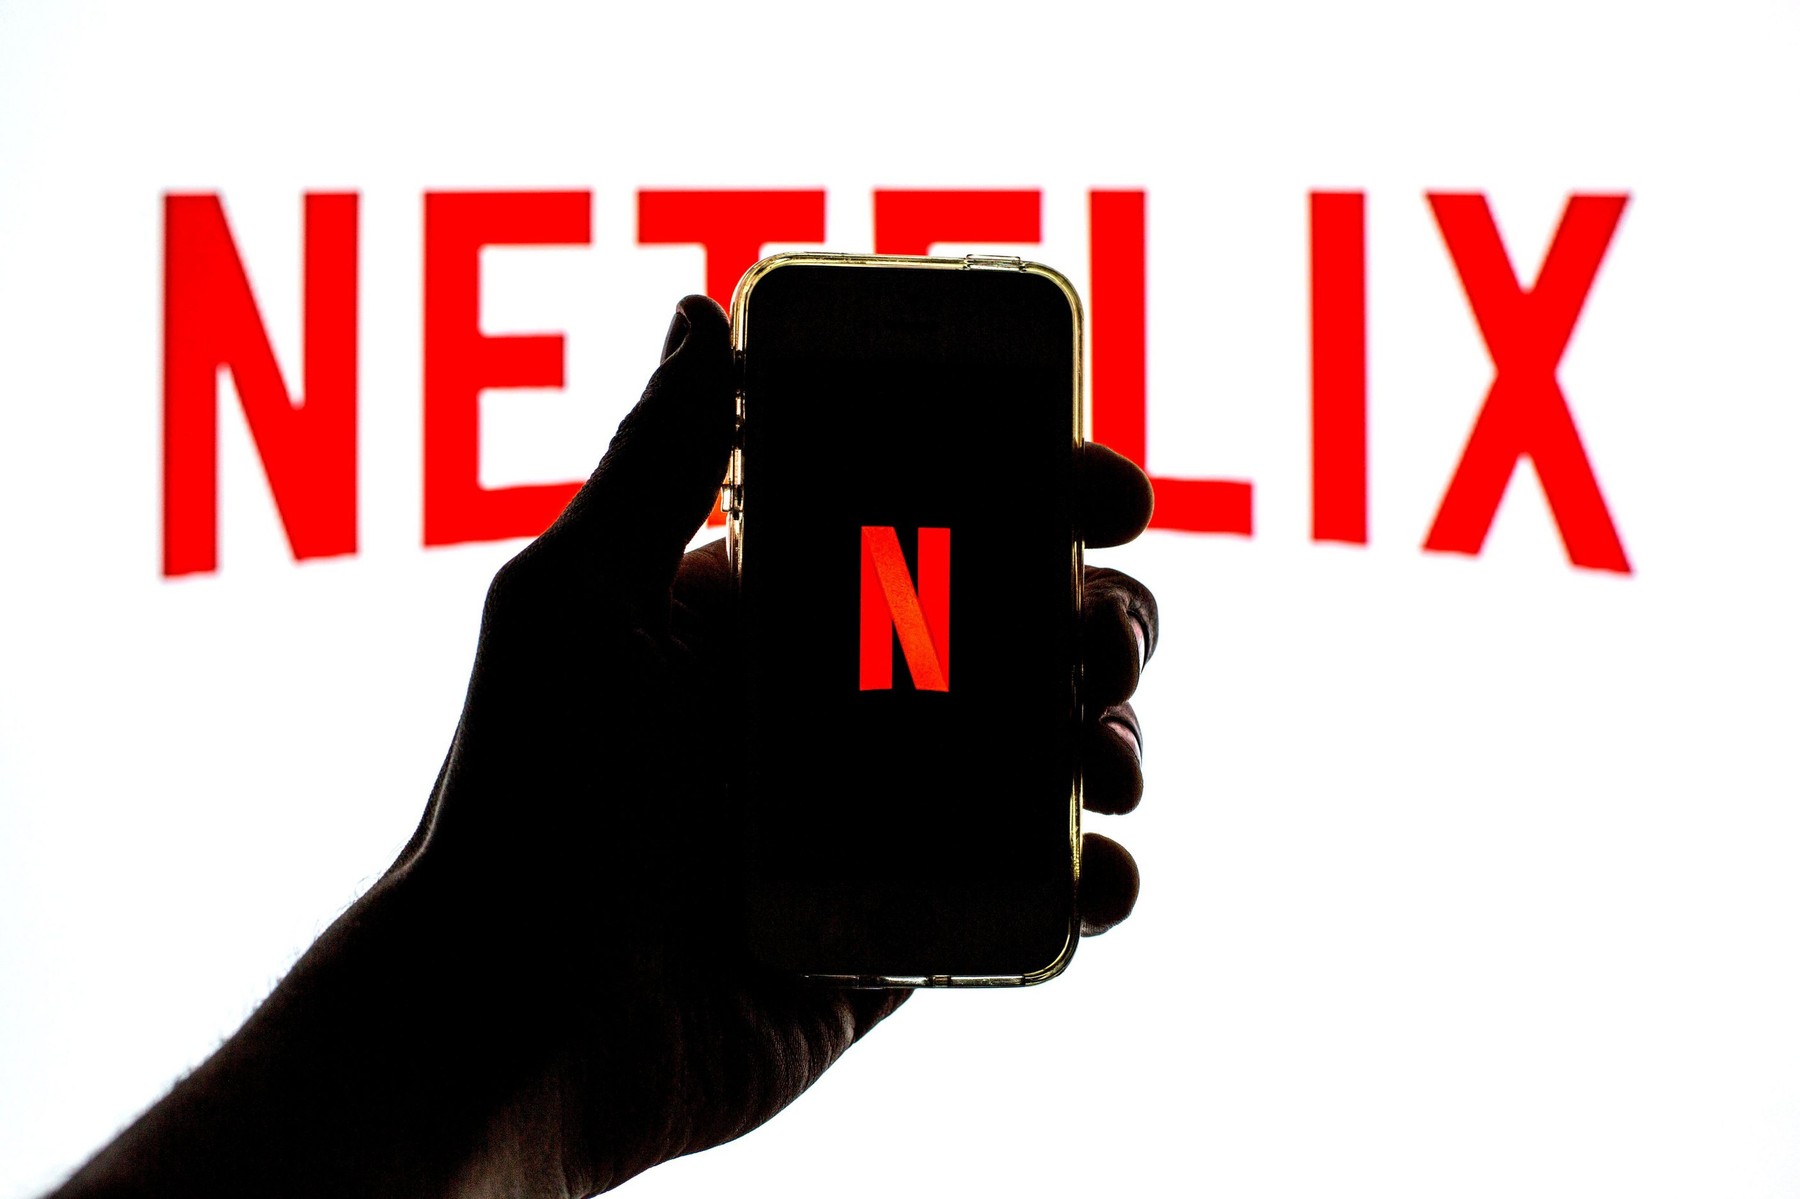 Netflix has made one of its most popular content available for free, which could set off many unsuspecting viewers